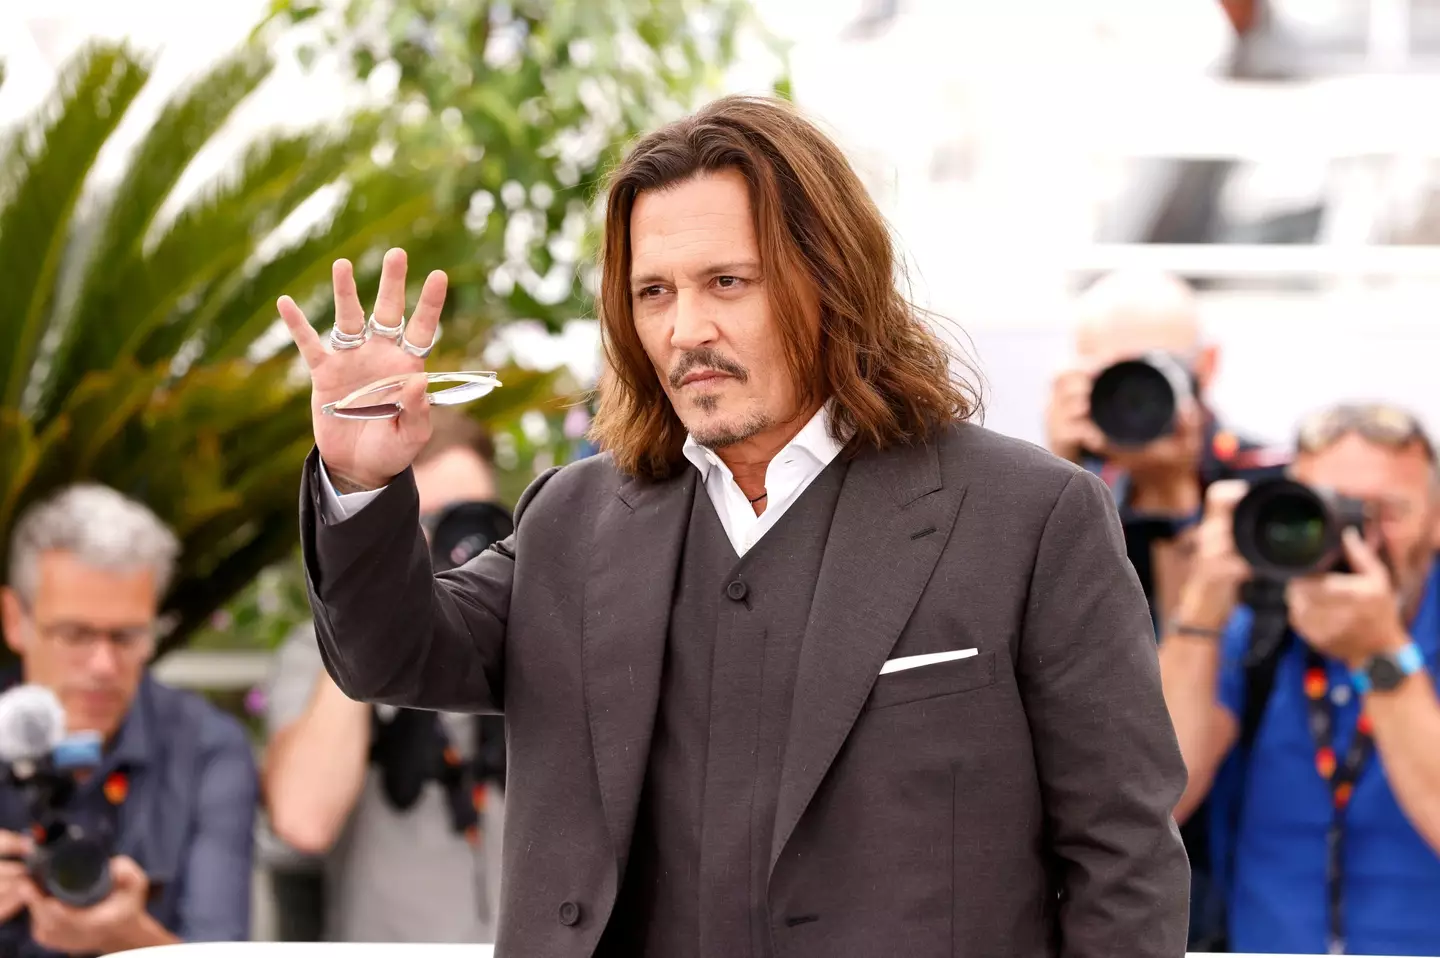 Johnny Depp at this year's Cannes Film Festival.